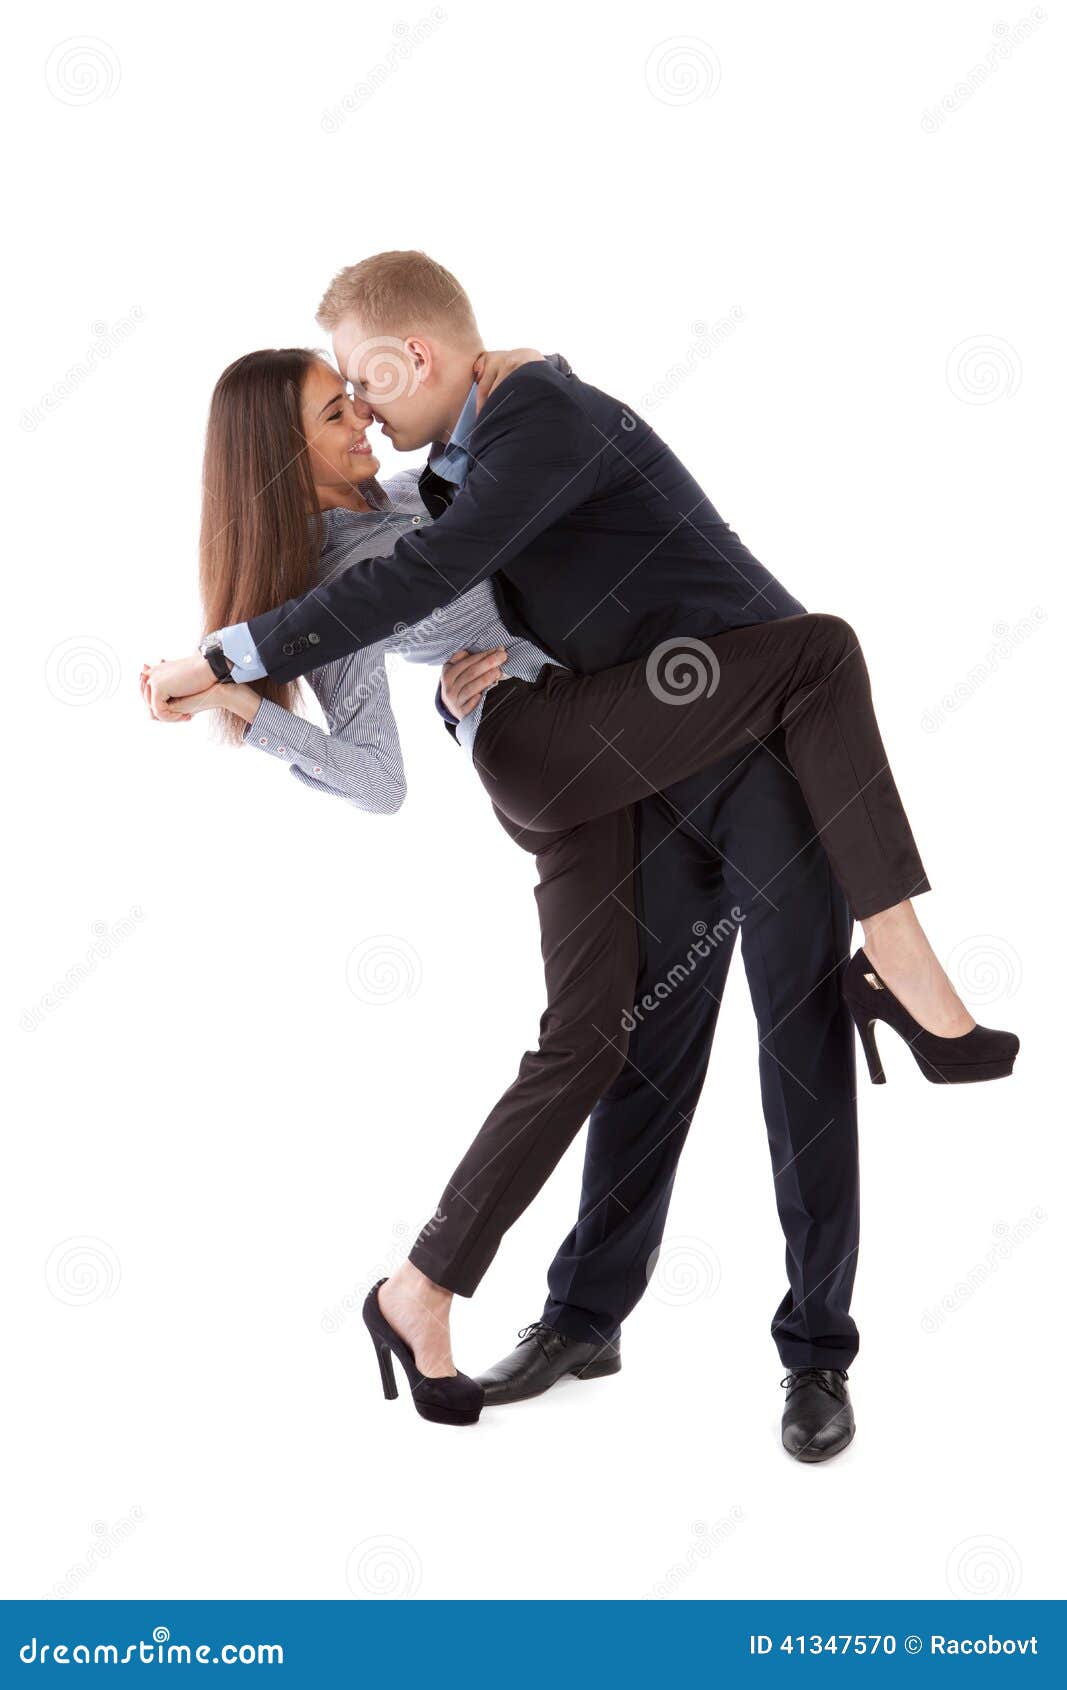 Young Couple Dancing Office Workers Stock Photo - Image: 41347570